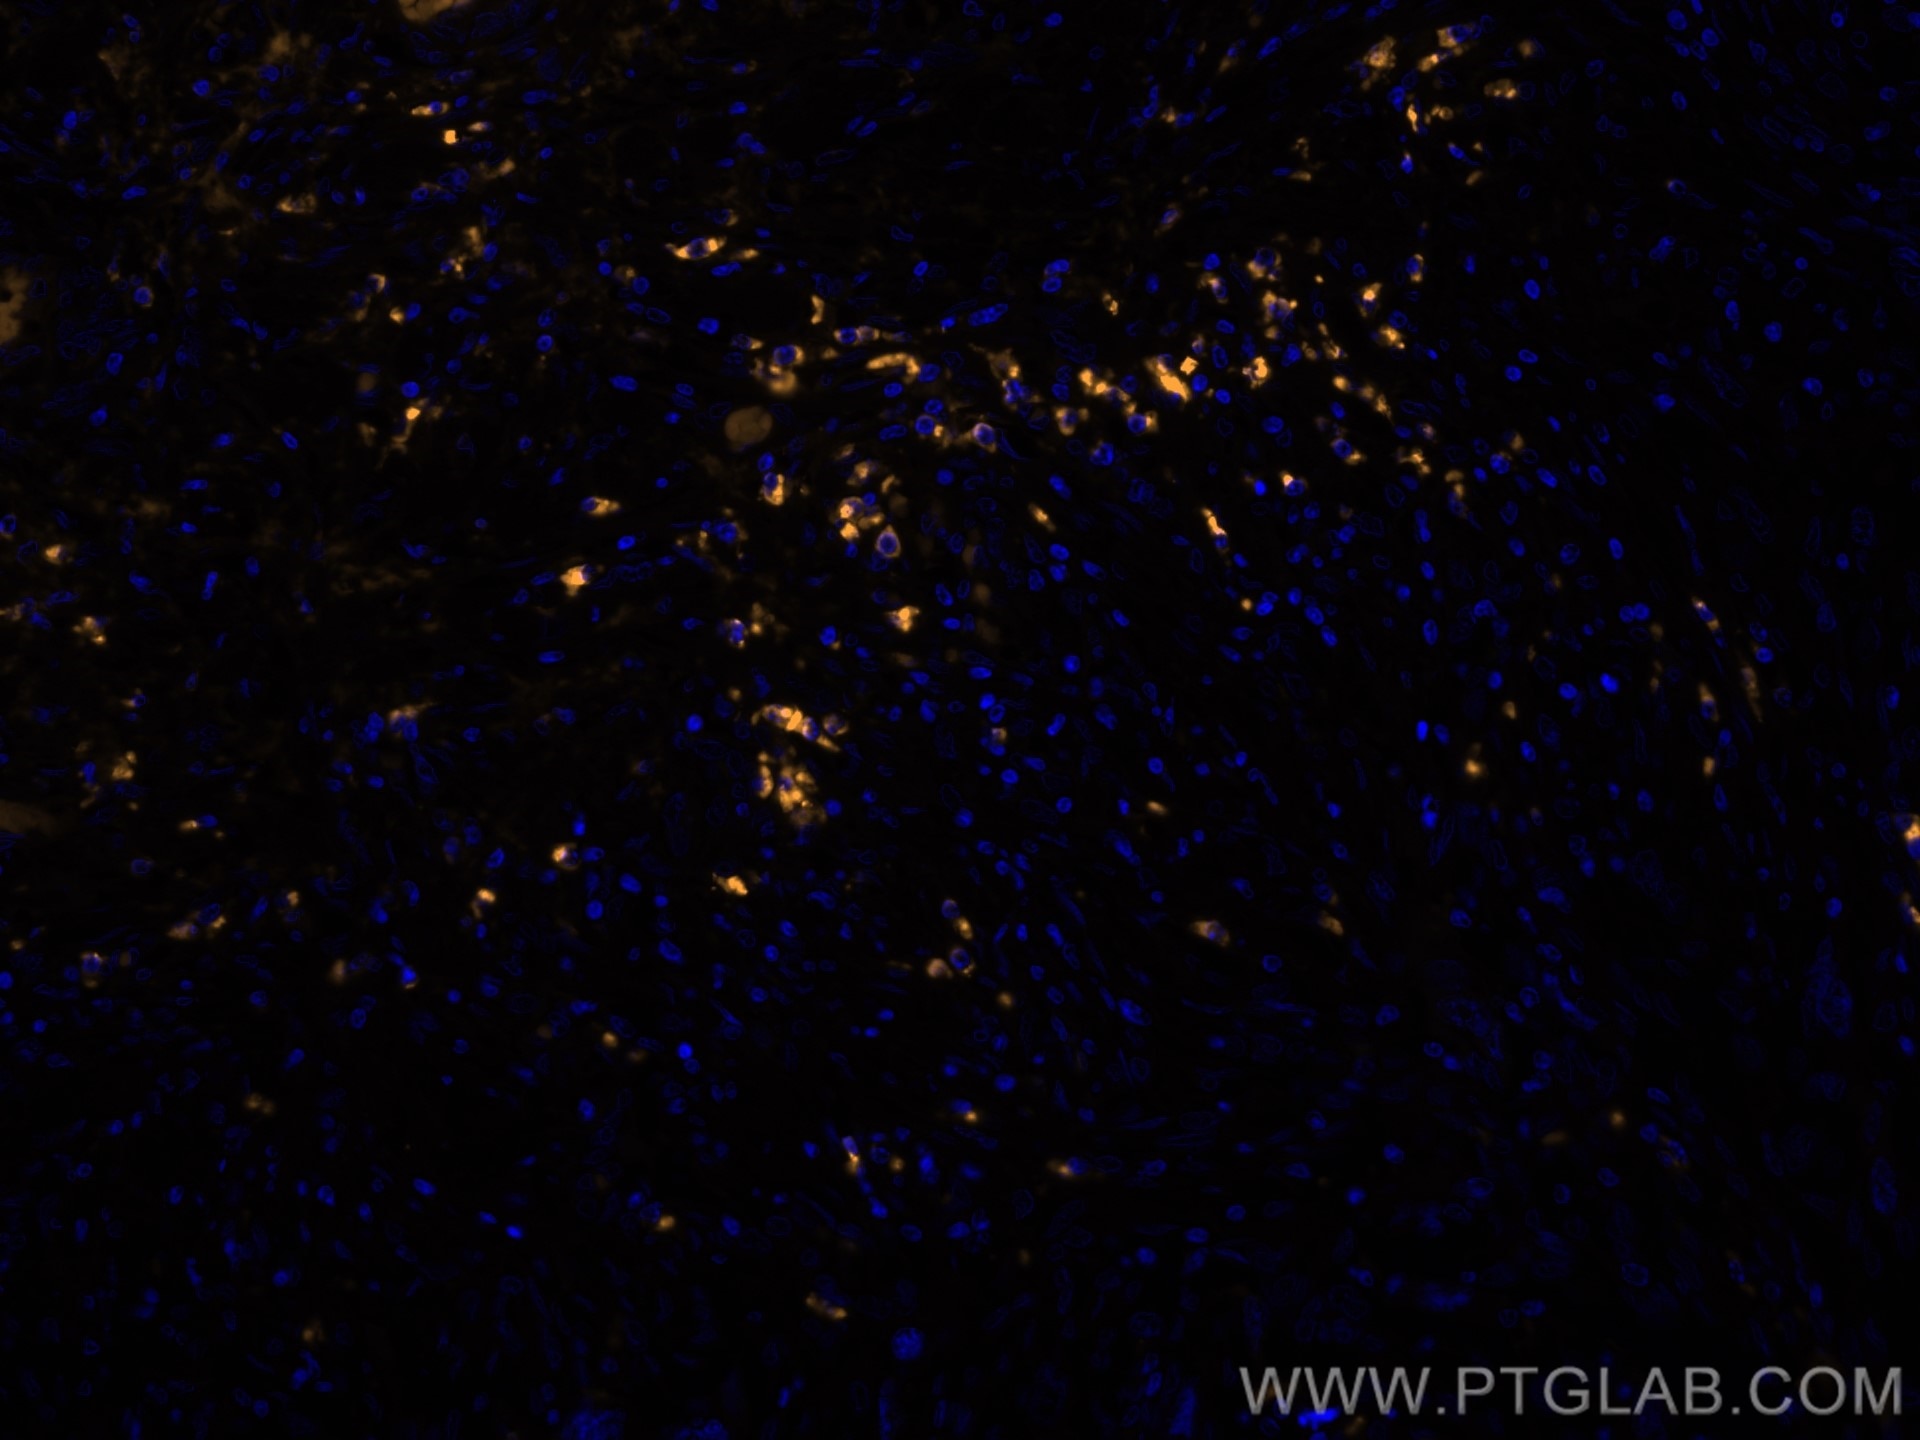 Immunofluorescent analysis of (4% PFA) fixed human lung cancer using FlexAble HRP Antibody Labeling Kit for Human IgG (KFA110) and Tyramide-555(orange) to label endogenous human IgG in the tissue.